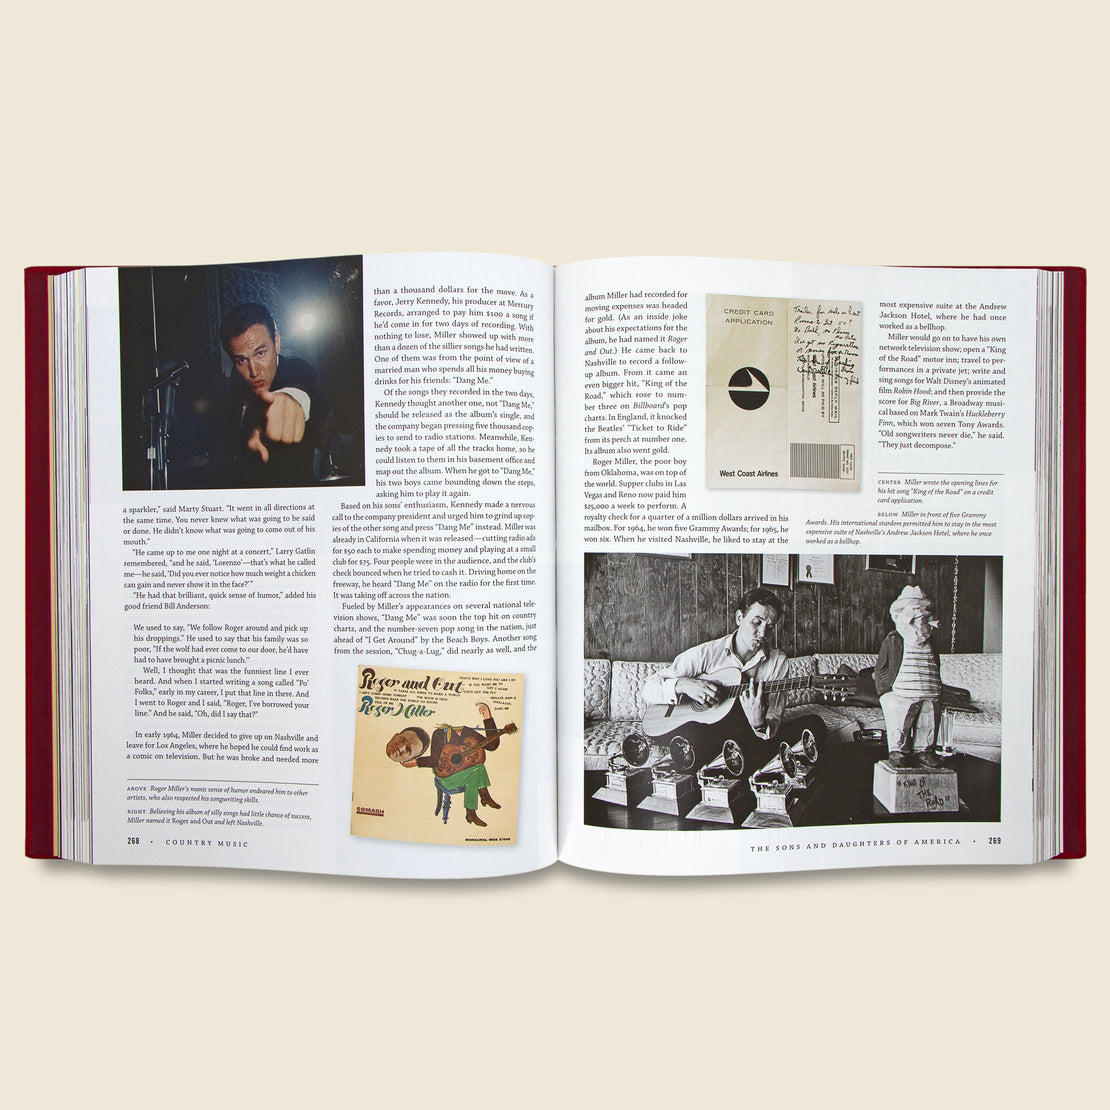 Country Music by Dayton Duncan & Ken Burns - Bookstore - STAG Provisions - Home - Library - Book